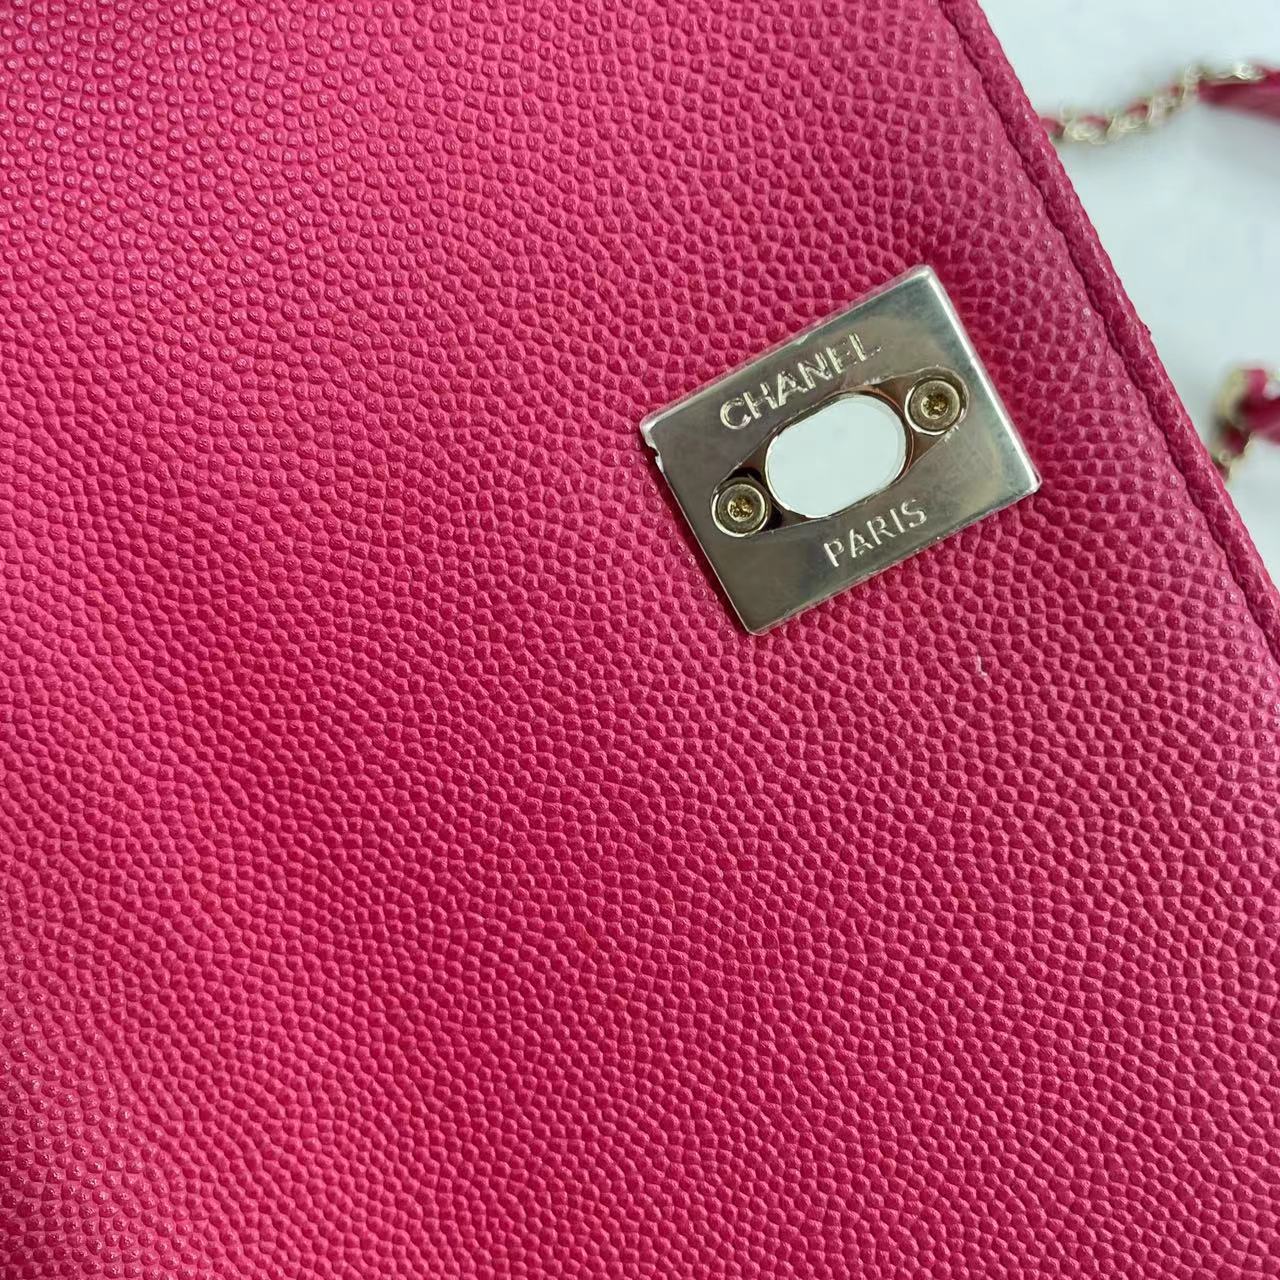 Chanel Business Affinity Small Pink Caviar Leather Top Handle Crossbody Bag